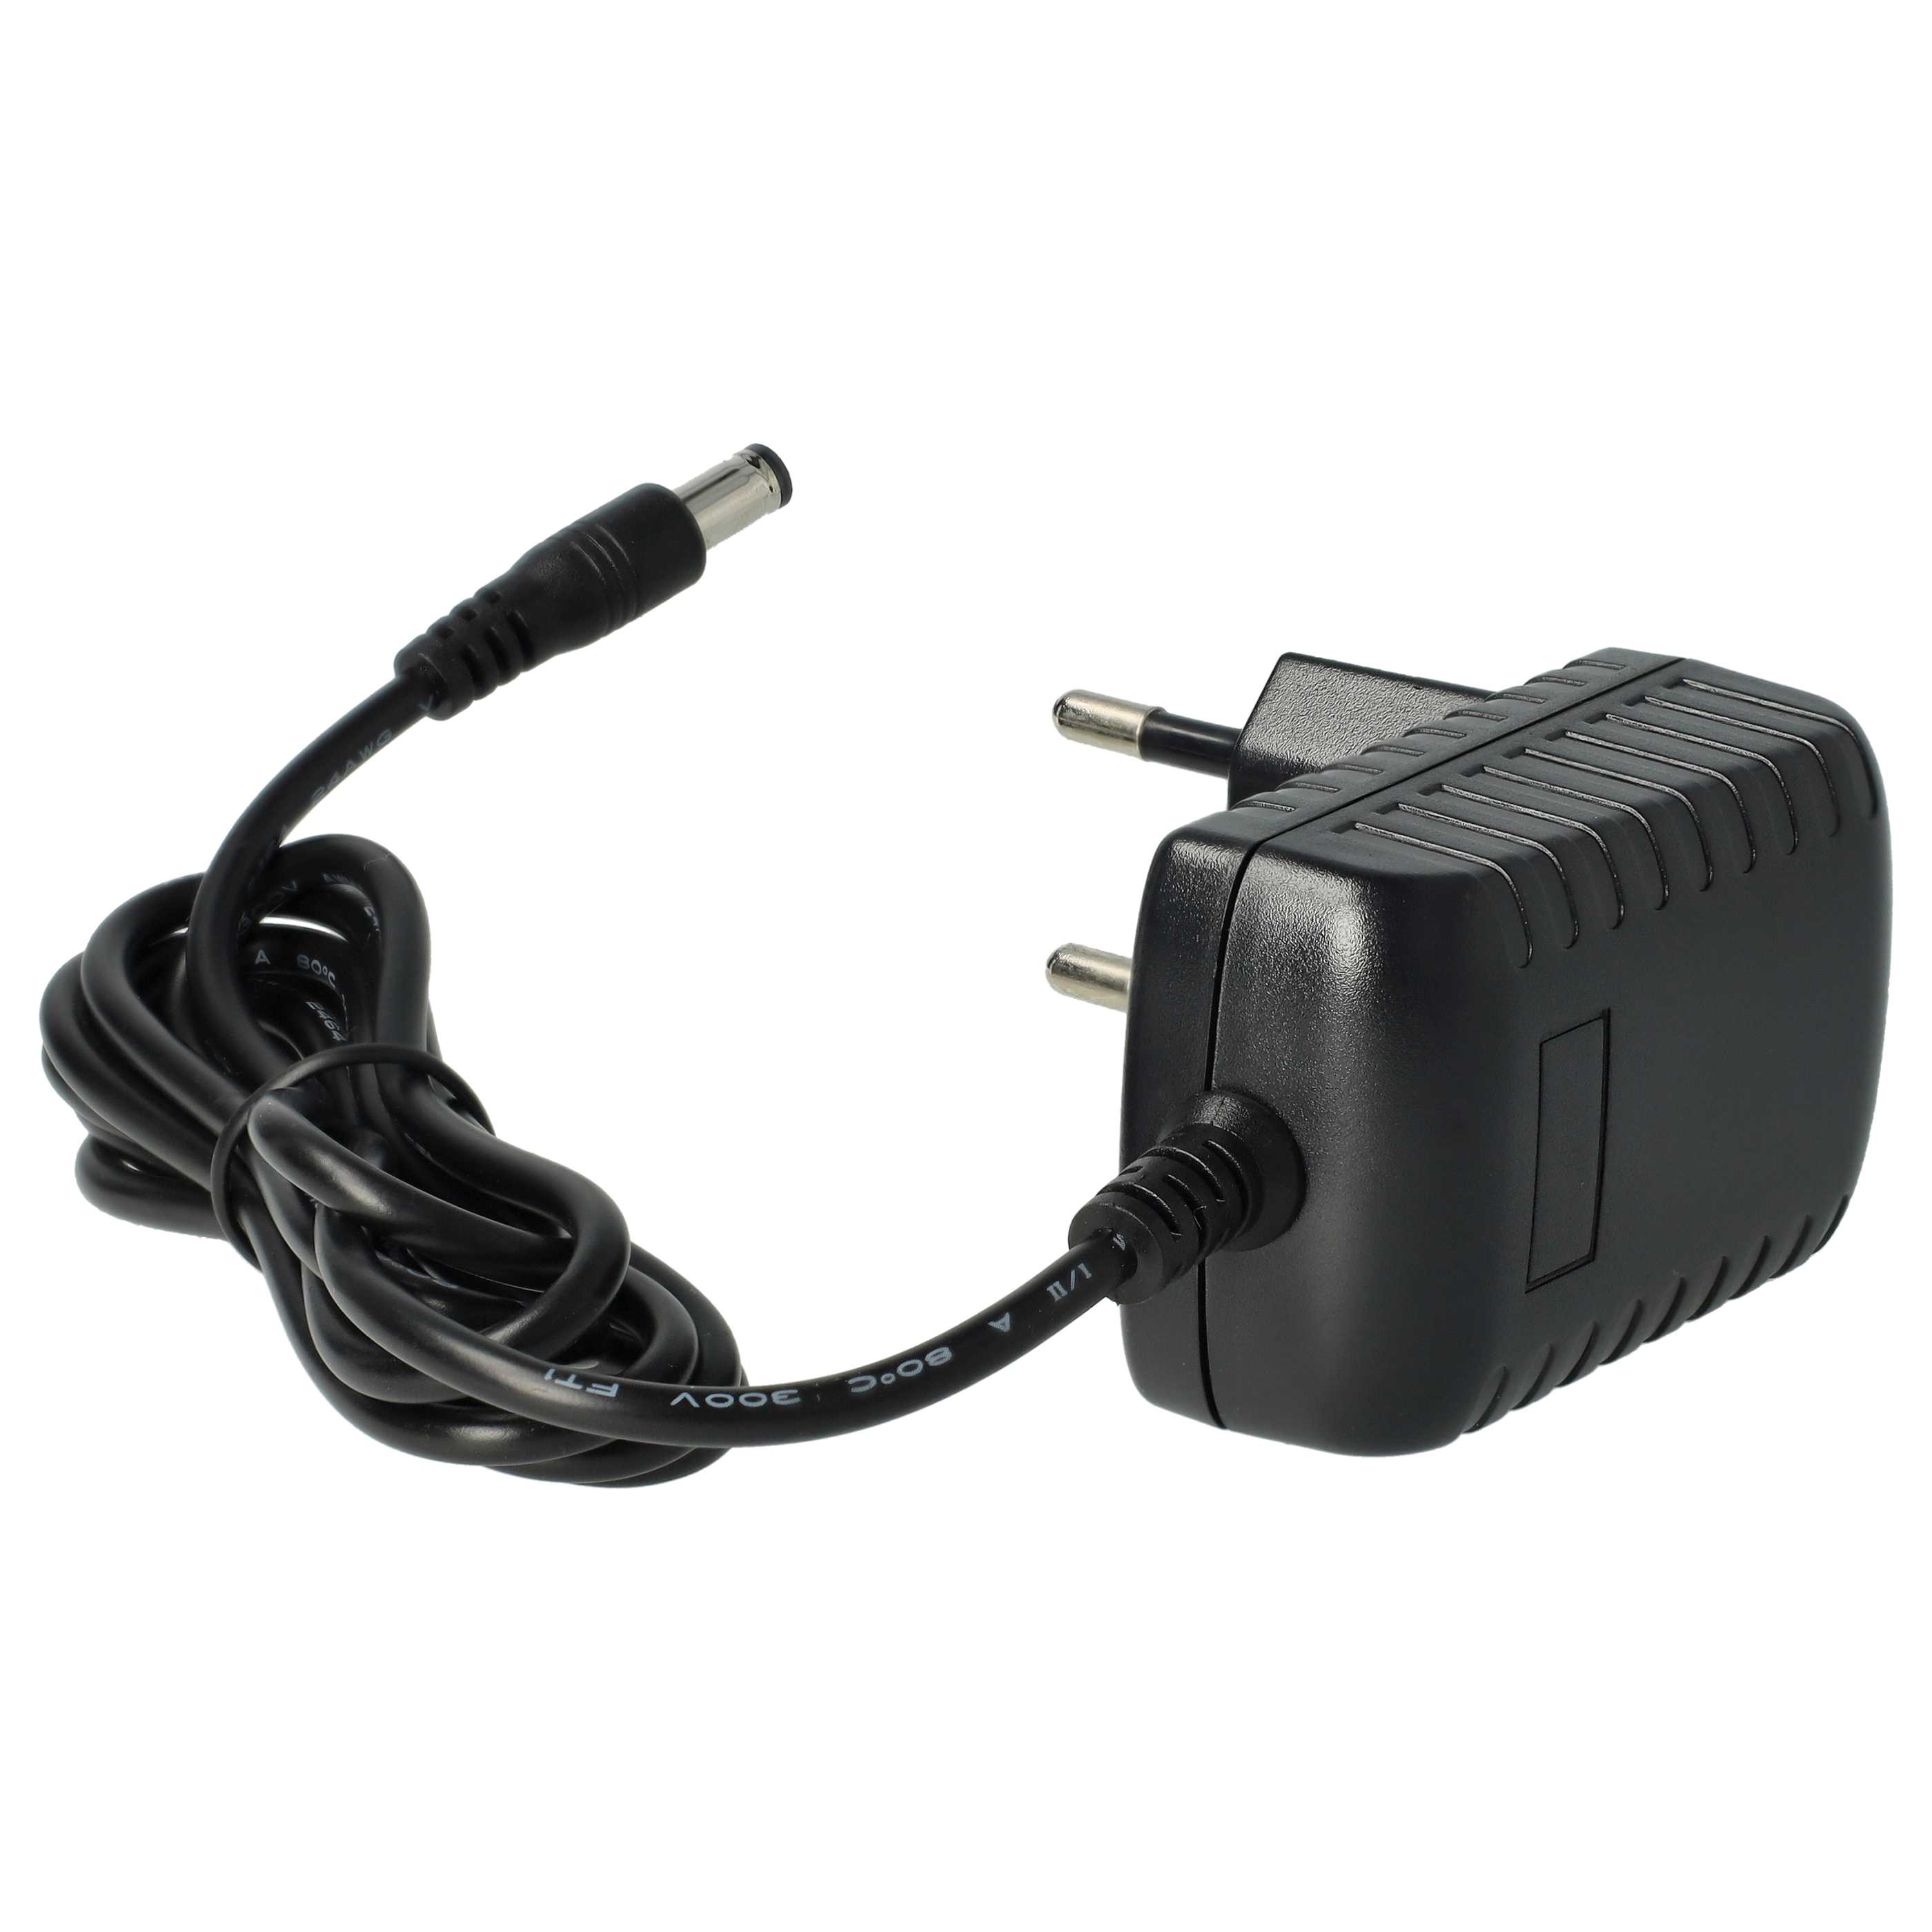 Power Adapter replaces Hartmann 8194047/01, 900 153 for HartmannBlood Pressure Monitor - 200 cm